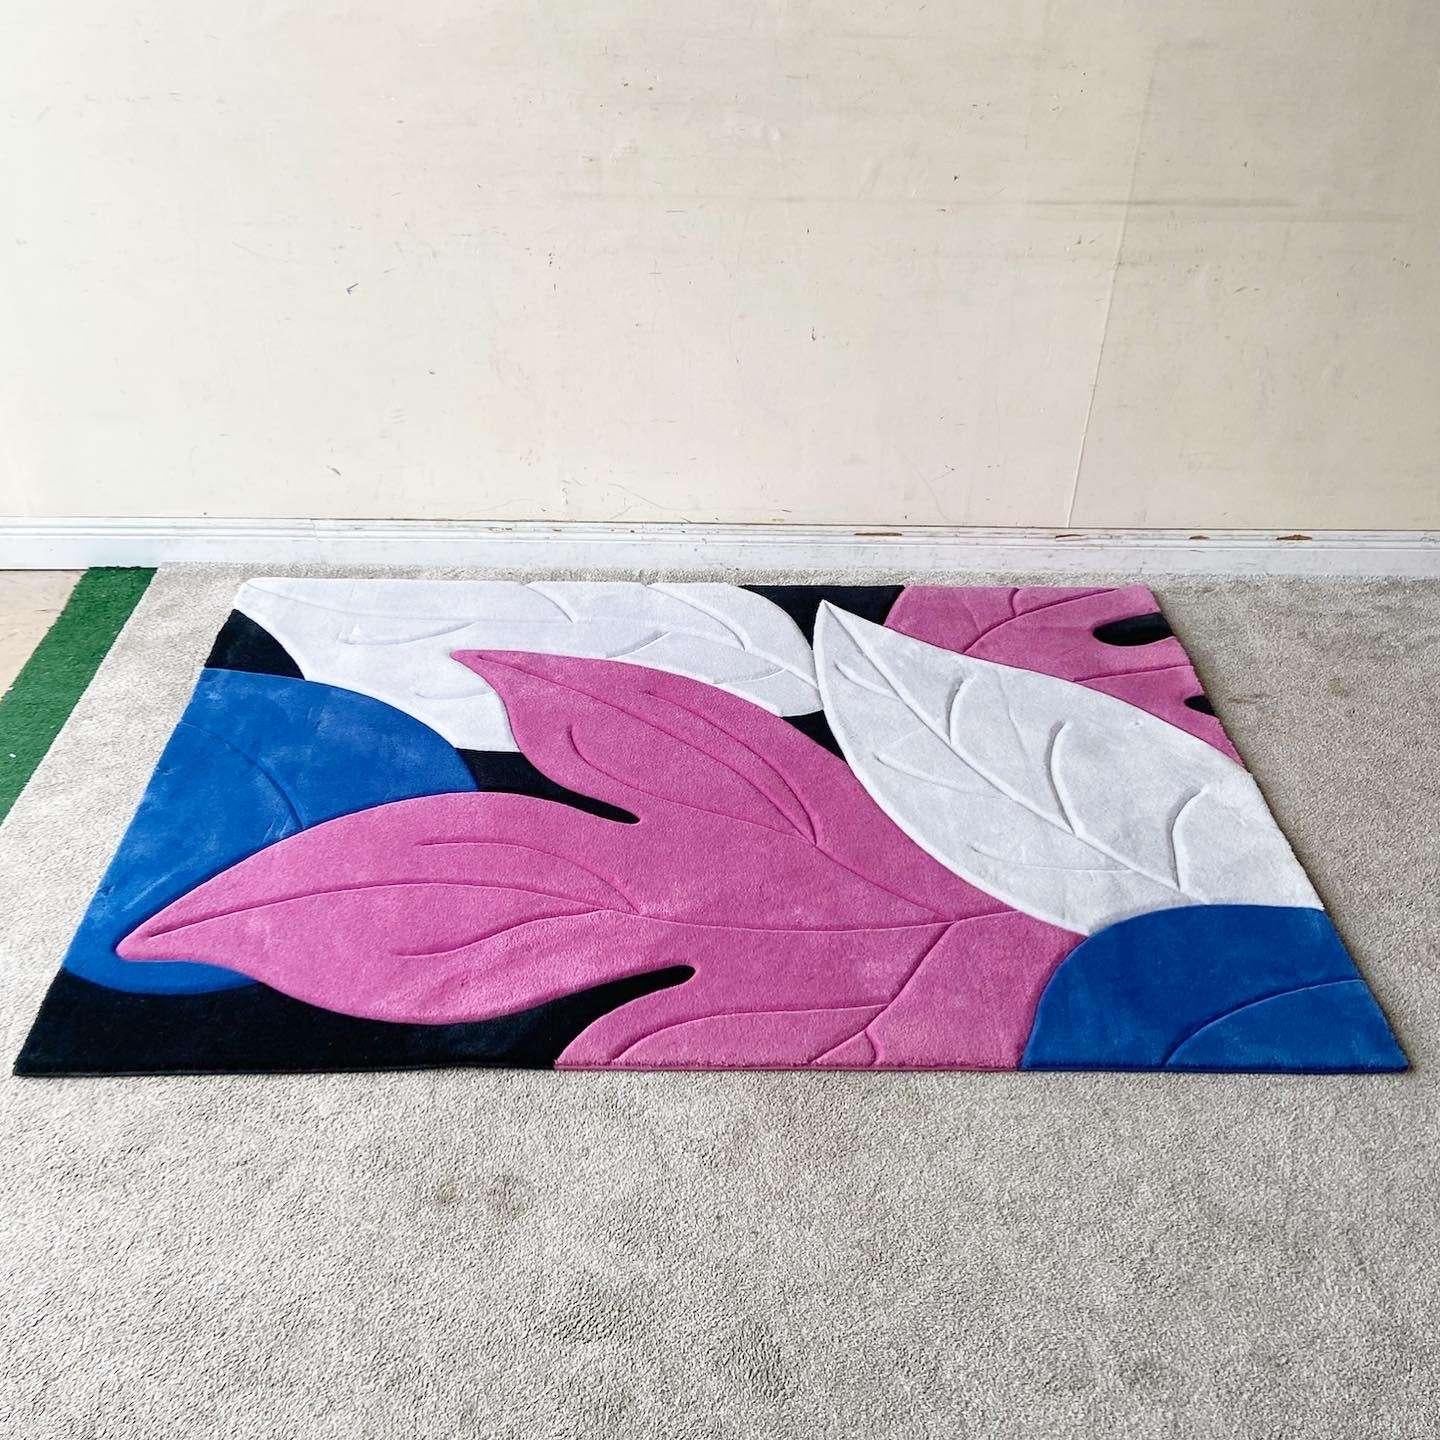 Exceptional vintage postmodern rectangular area rug. Features a vibrant display of pink, white and blue foliage on a black backdrop.

Rug 6
